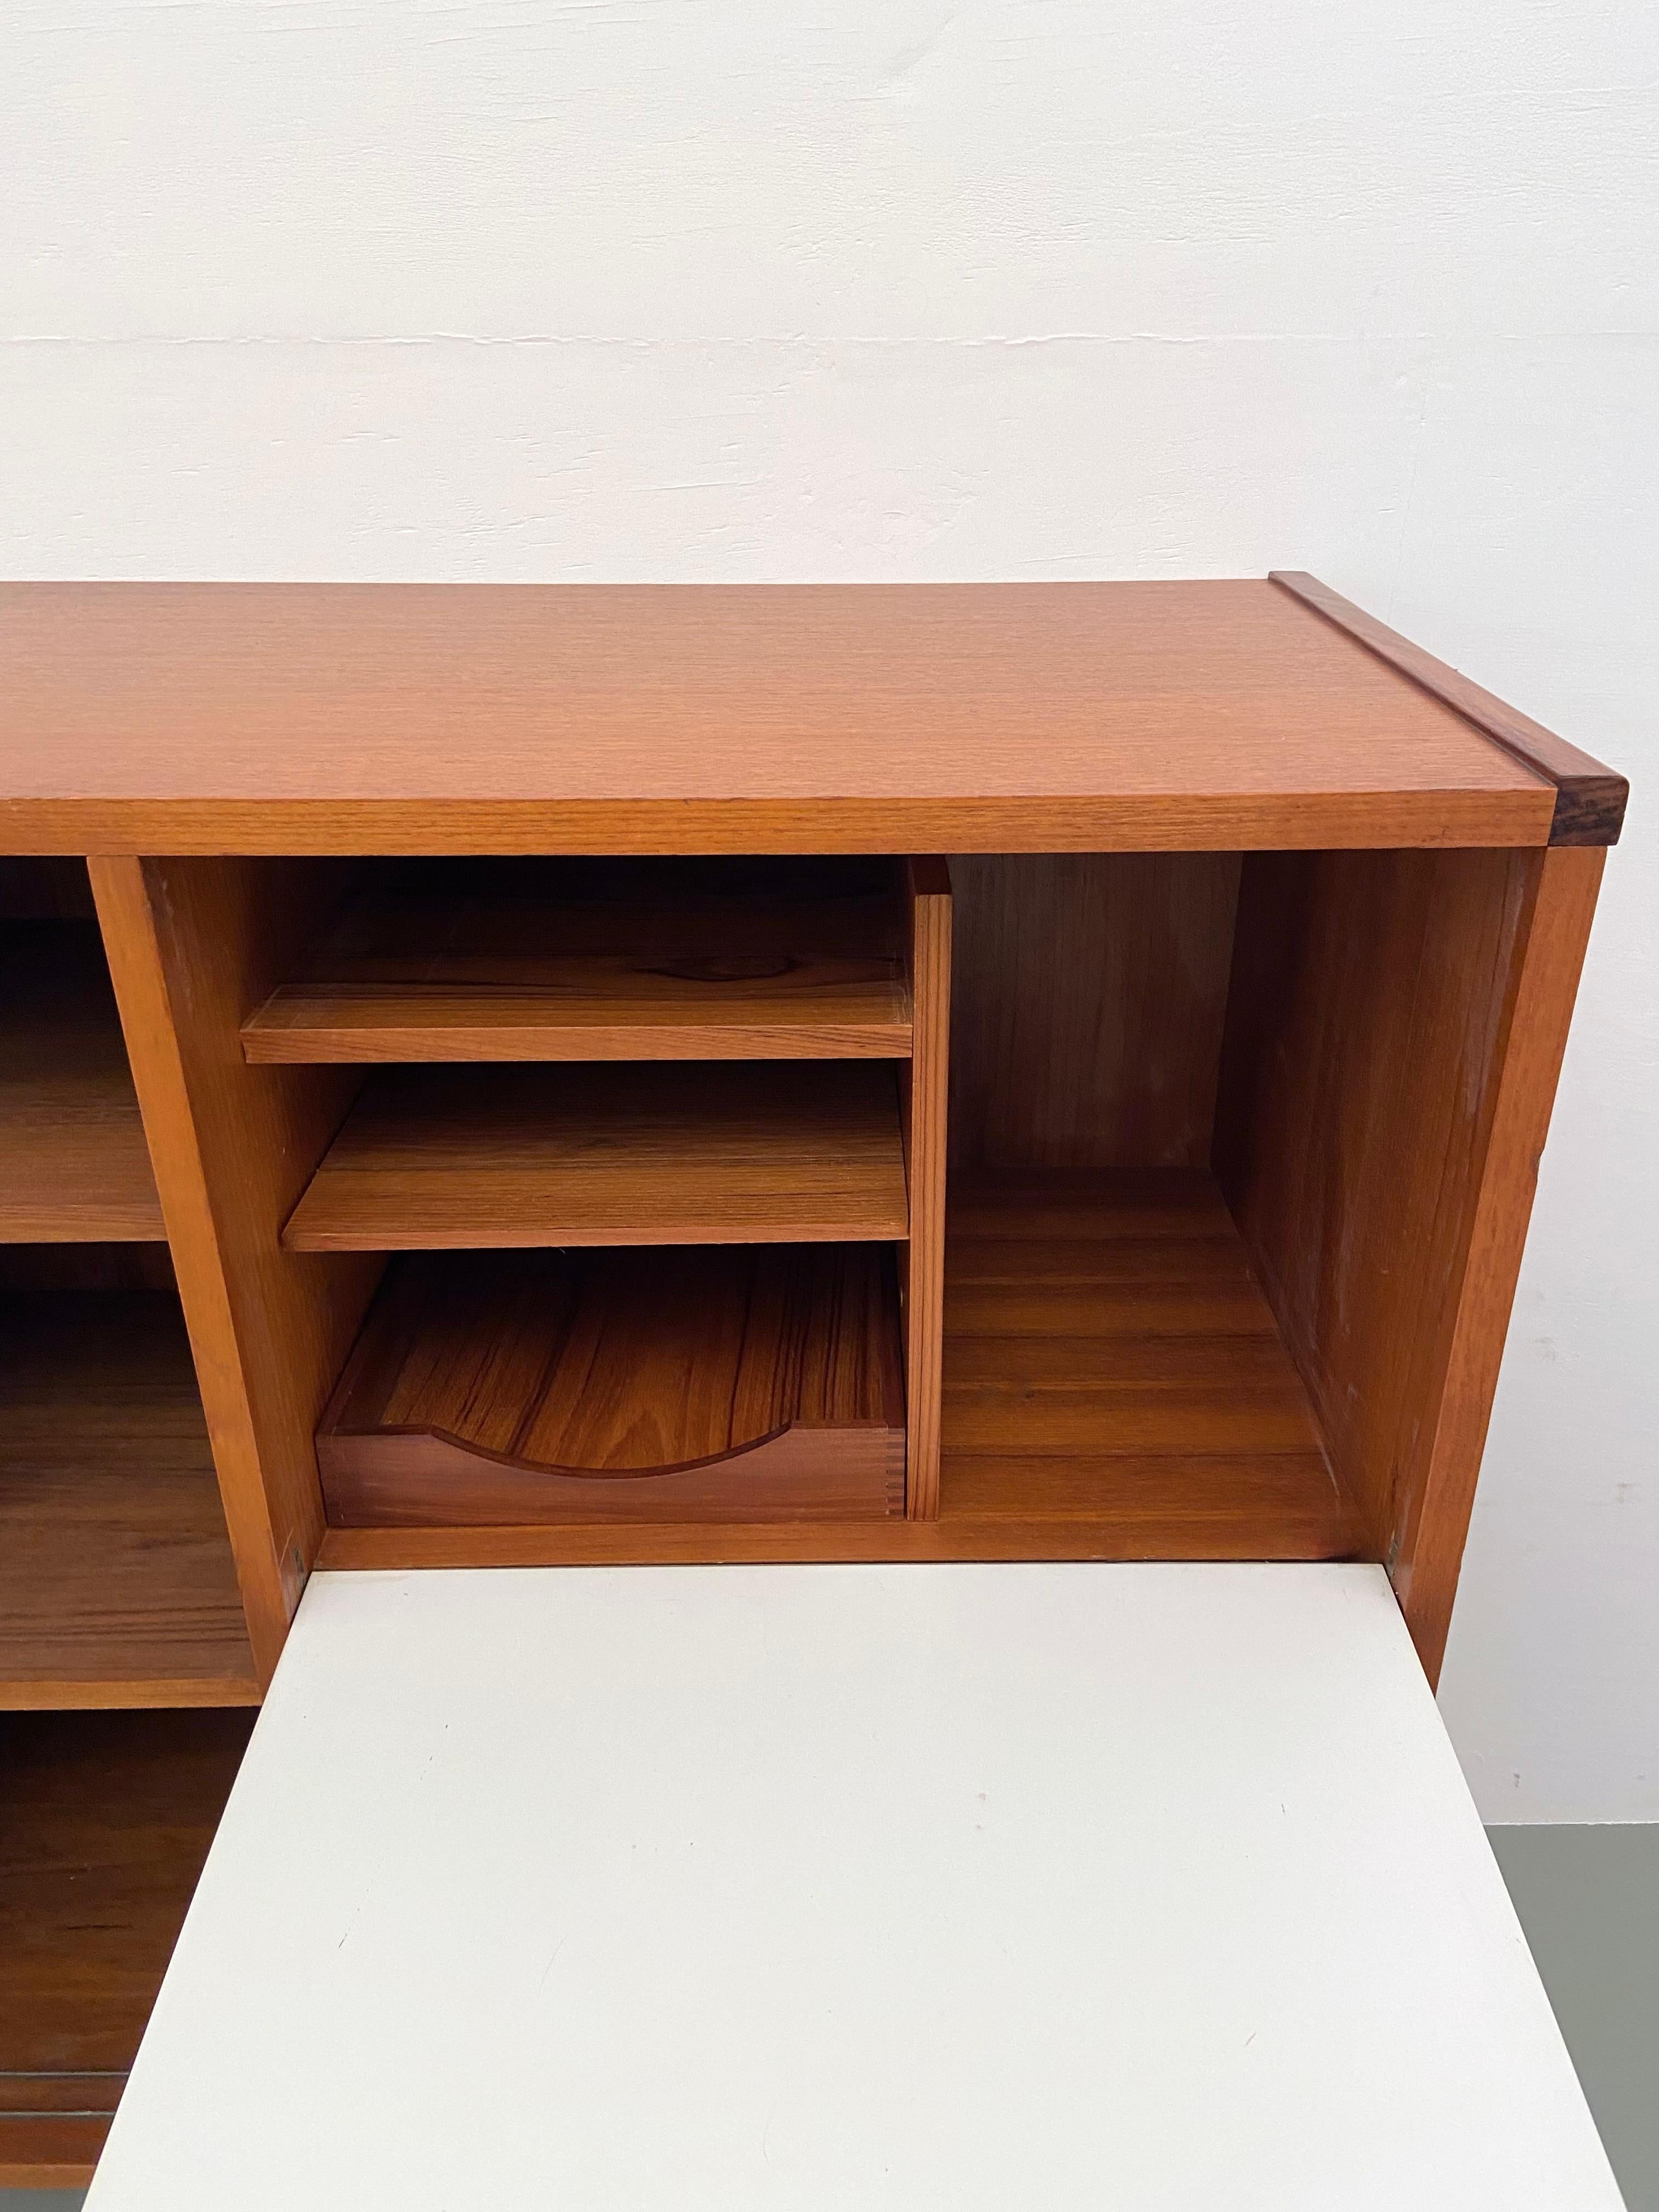 Mid-20th Century High Credenza by Pierro Ranzani for Elam in Laminate, Teak and Metal, 1962 For Sale